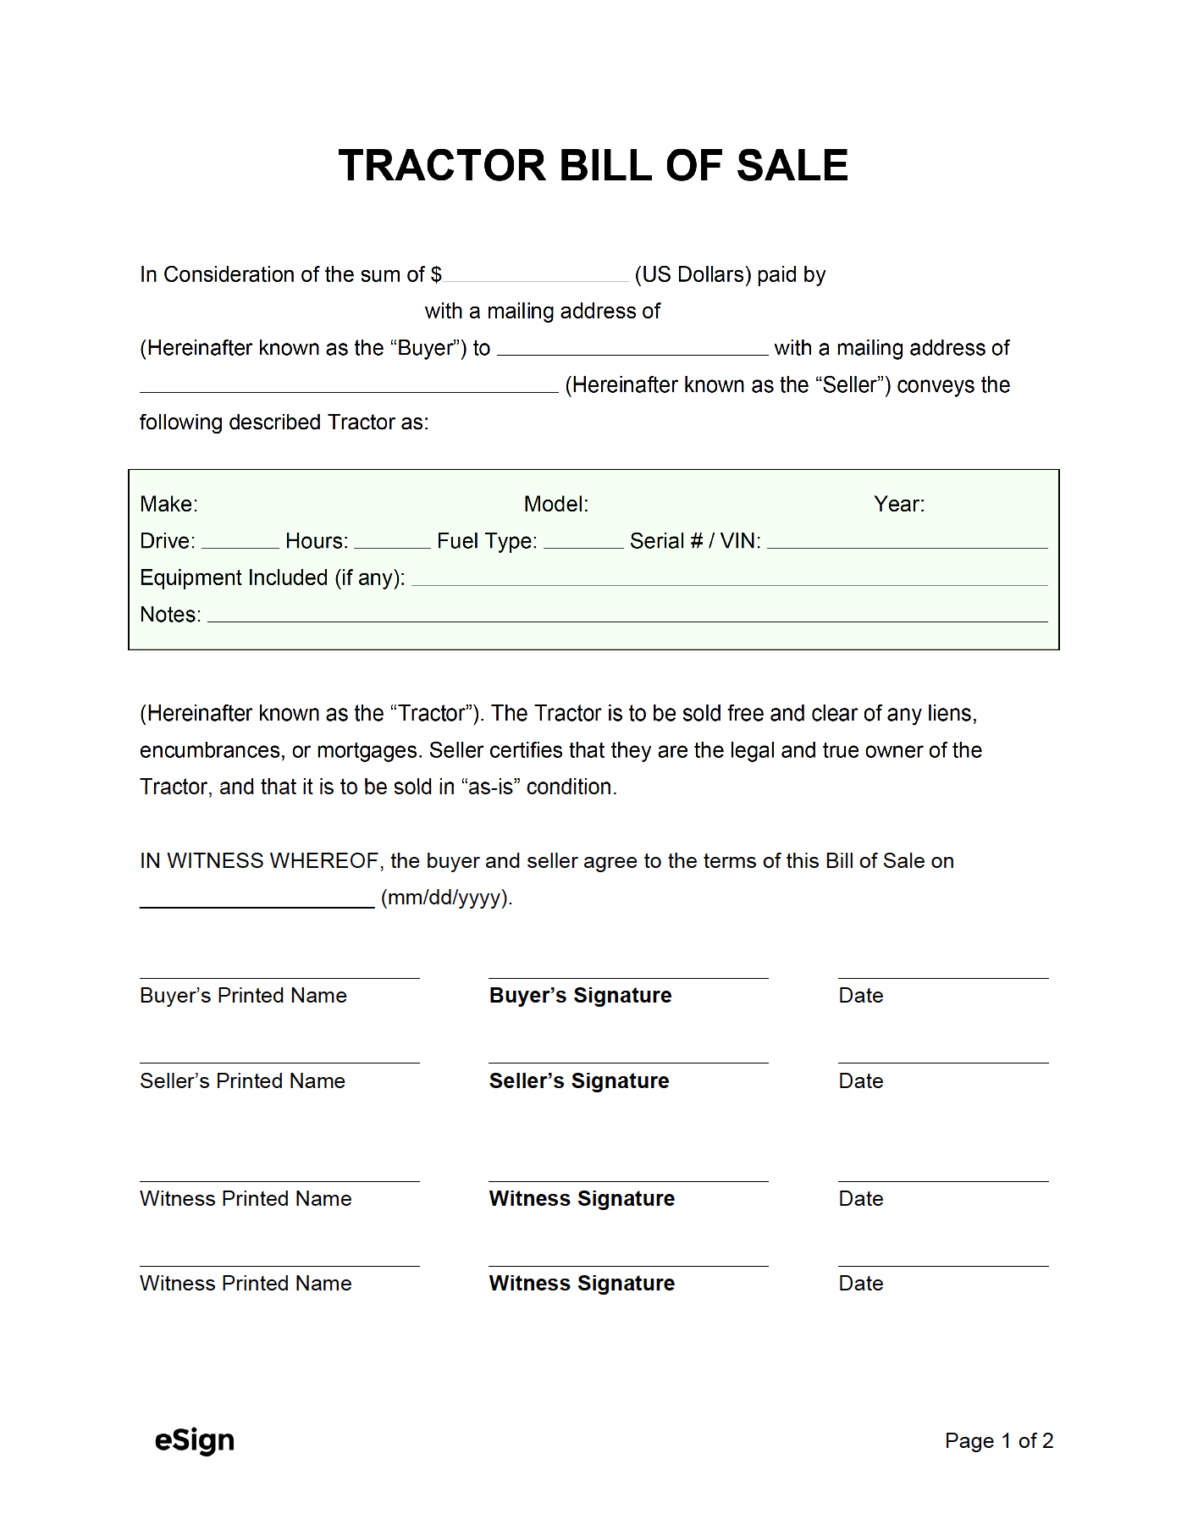 Tractor Bill Of Sale Template